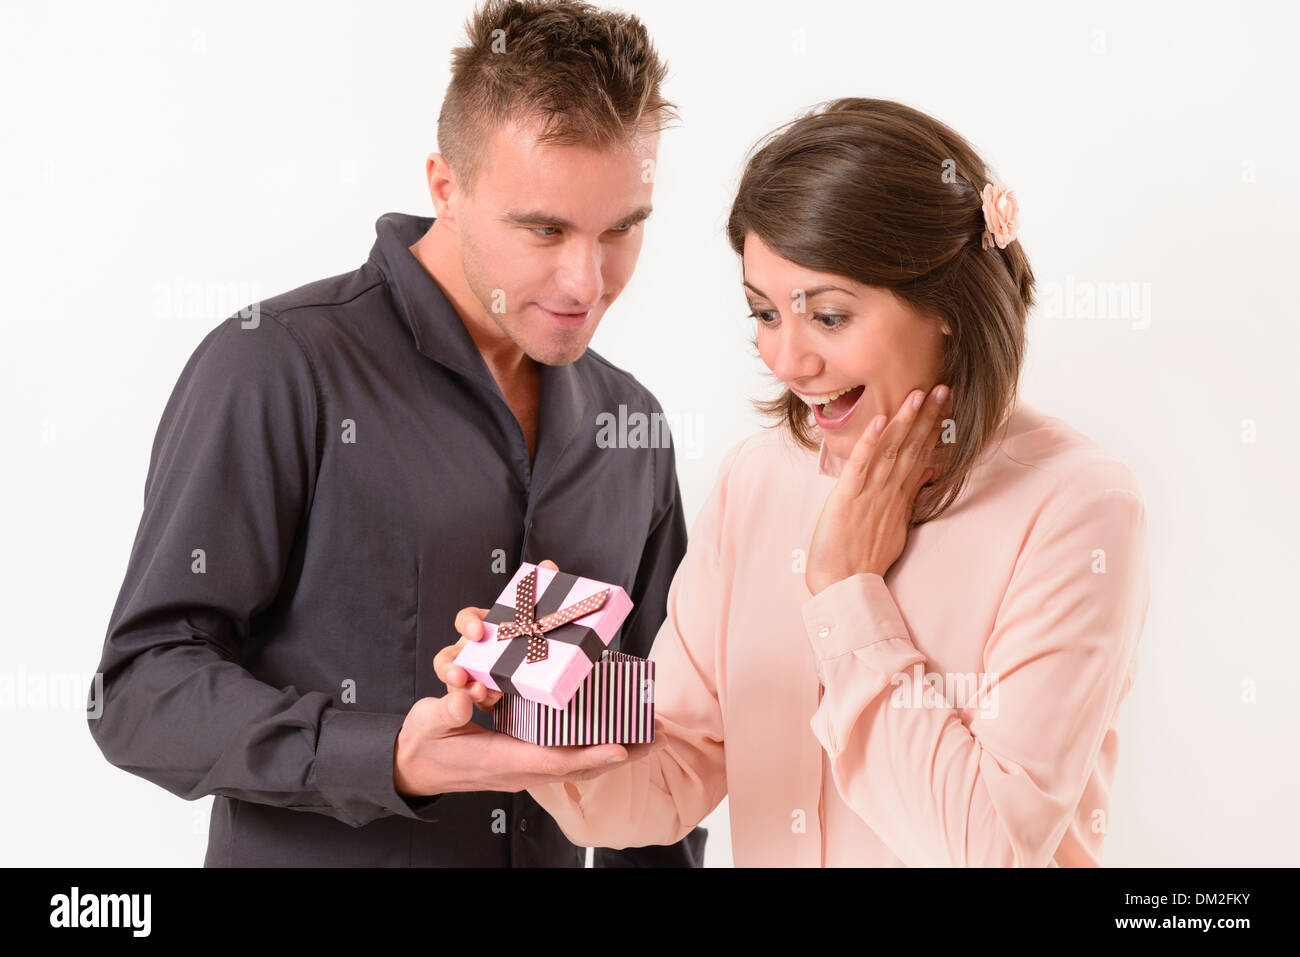 Young man giving a present to his girlfriend Stock Photo